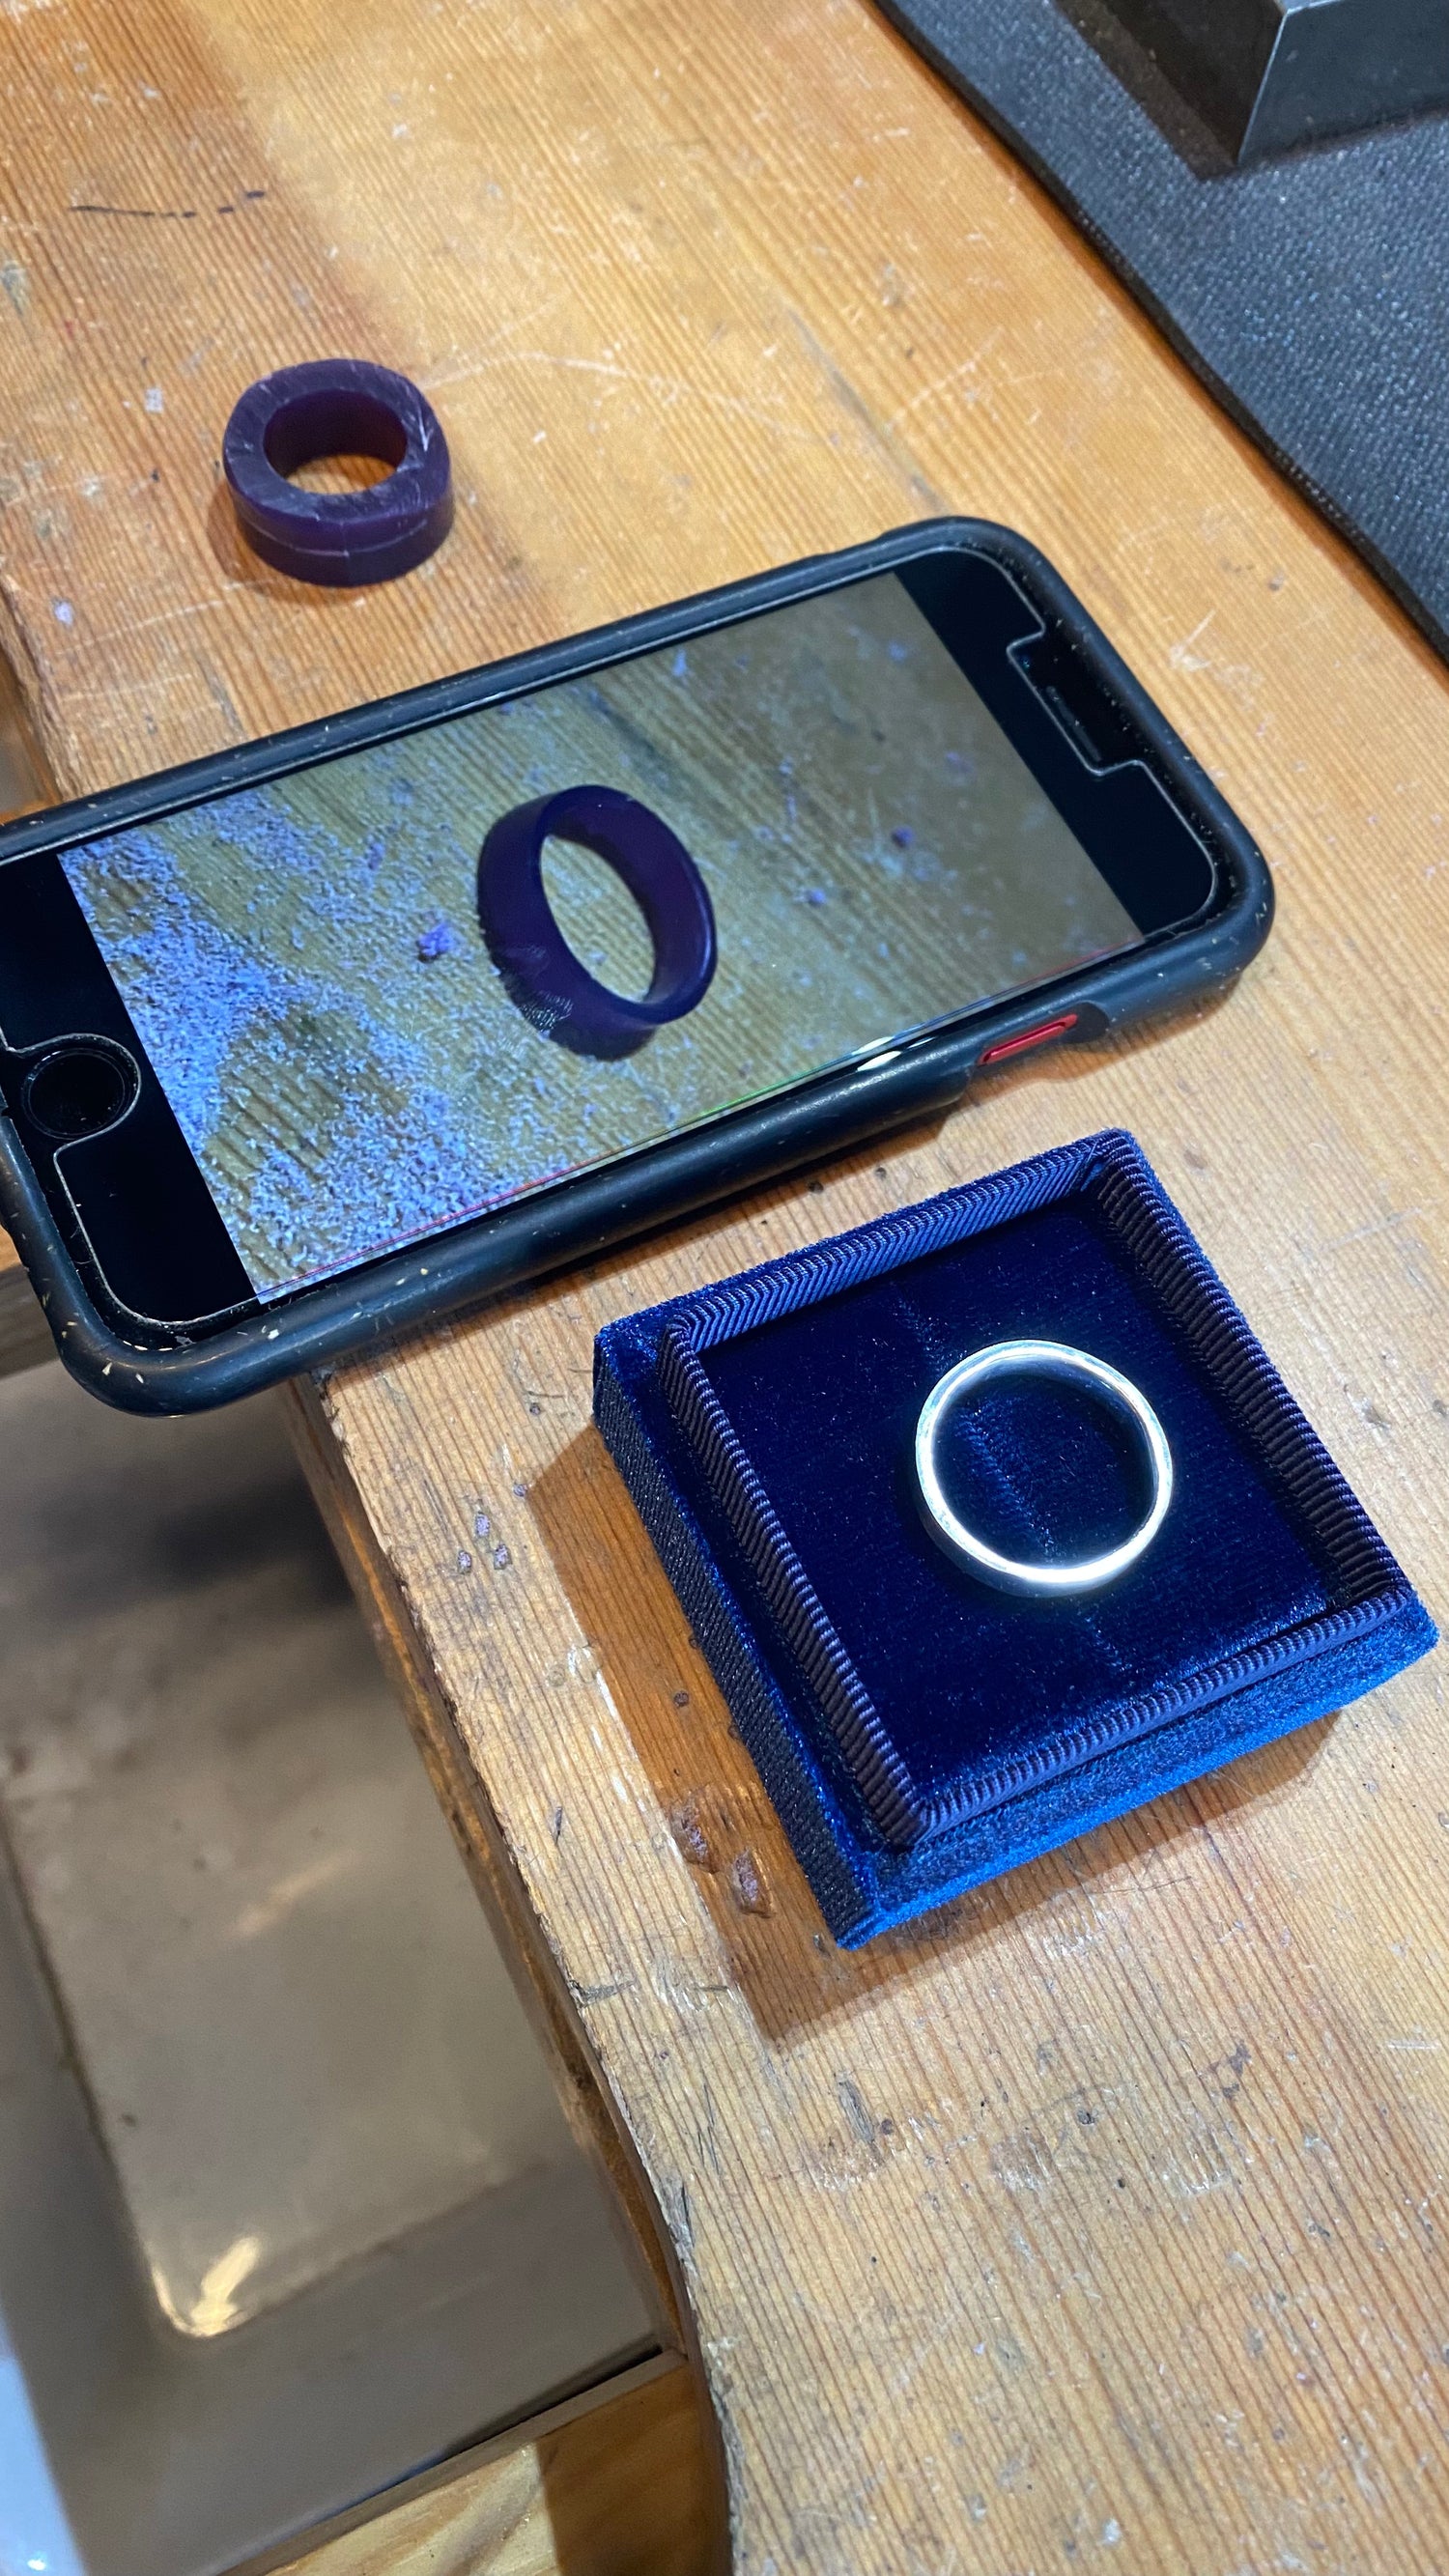 Layout on wood table of wax ring tube, phone with carved wax ring, and final white gold ring in blue velvet box